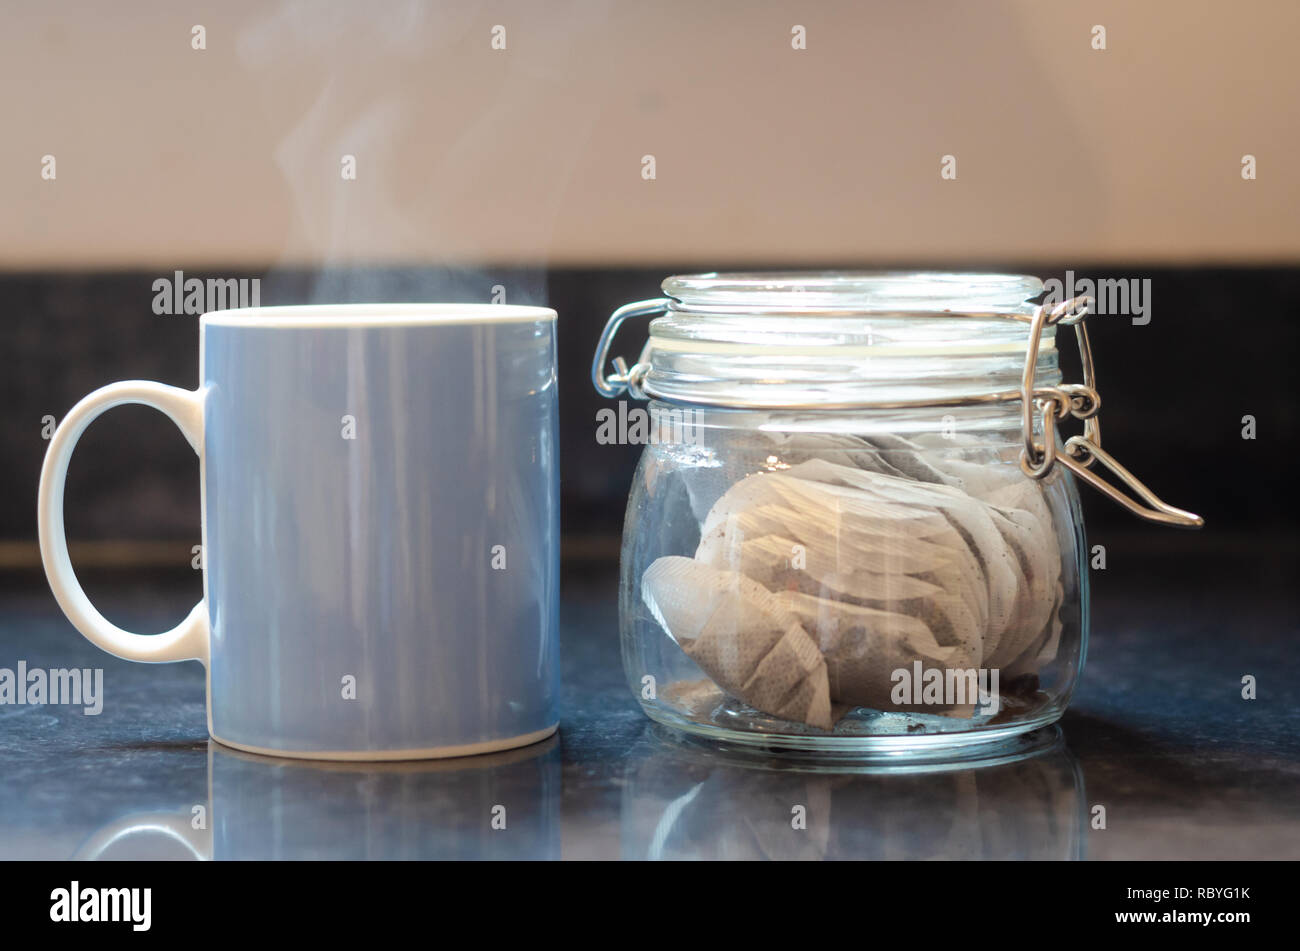 A blue mug and jar of tea bags on a kitchen worktop. Stock Photo